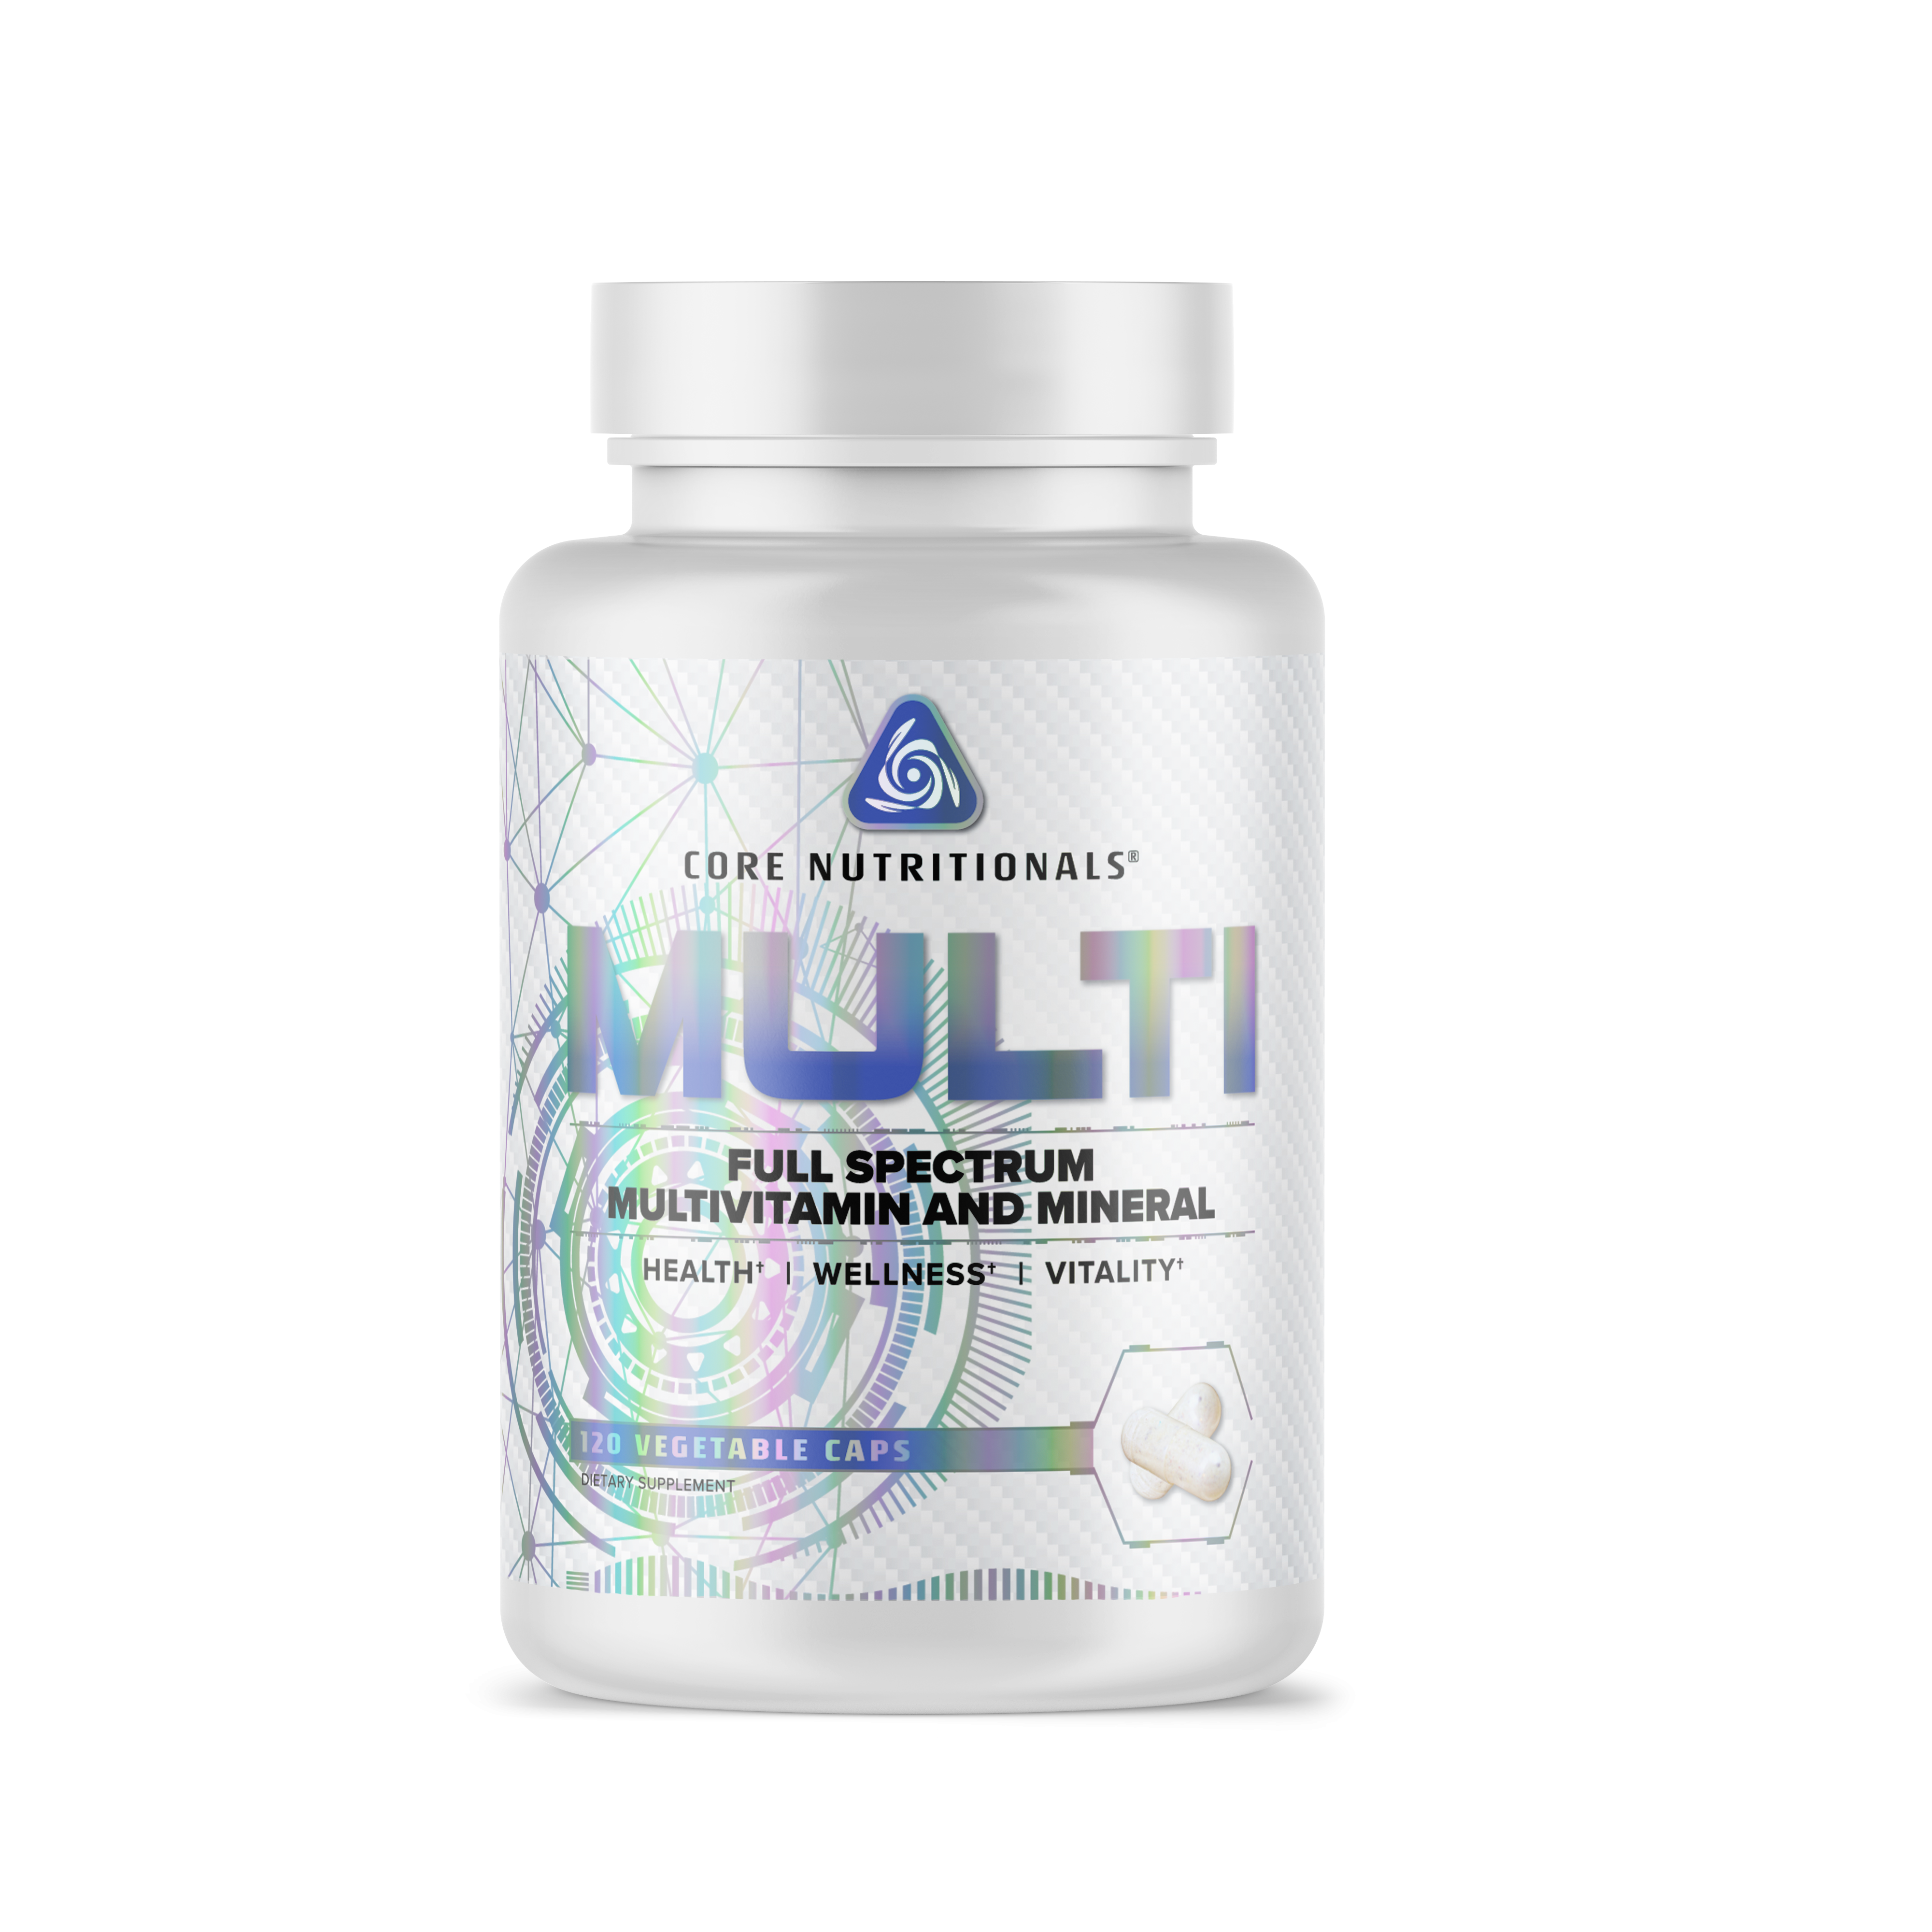 Core Nutritionals Multi – Human Health – Professional Supplements & Protein From A-list Nutrition